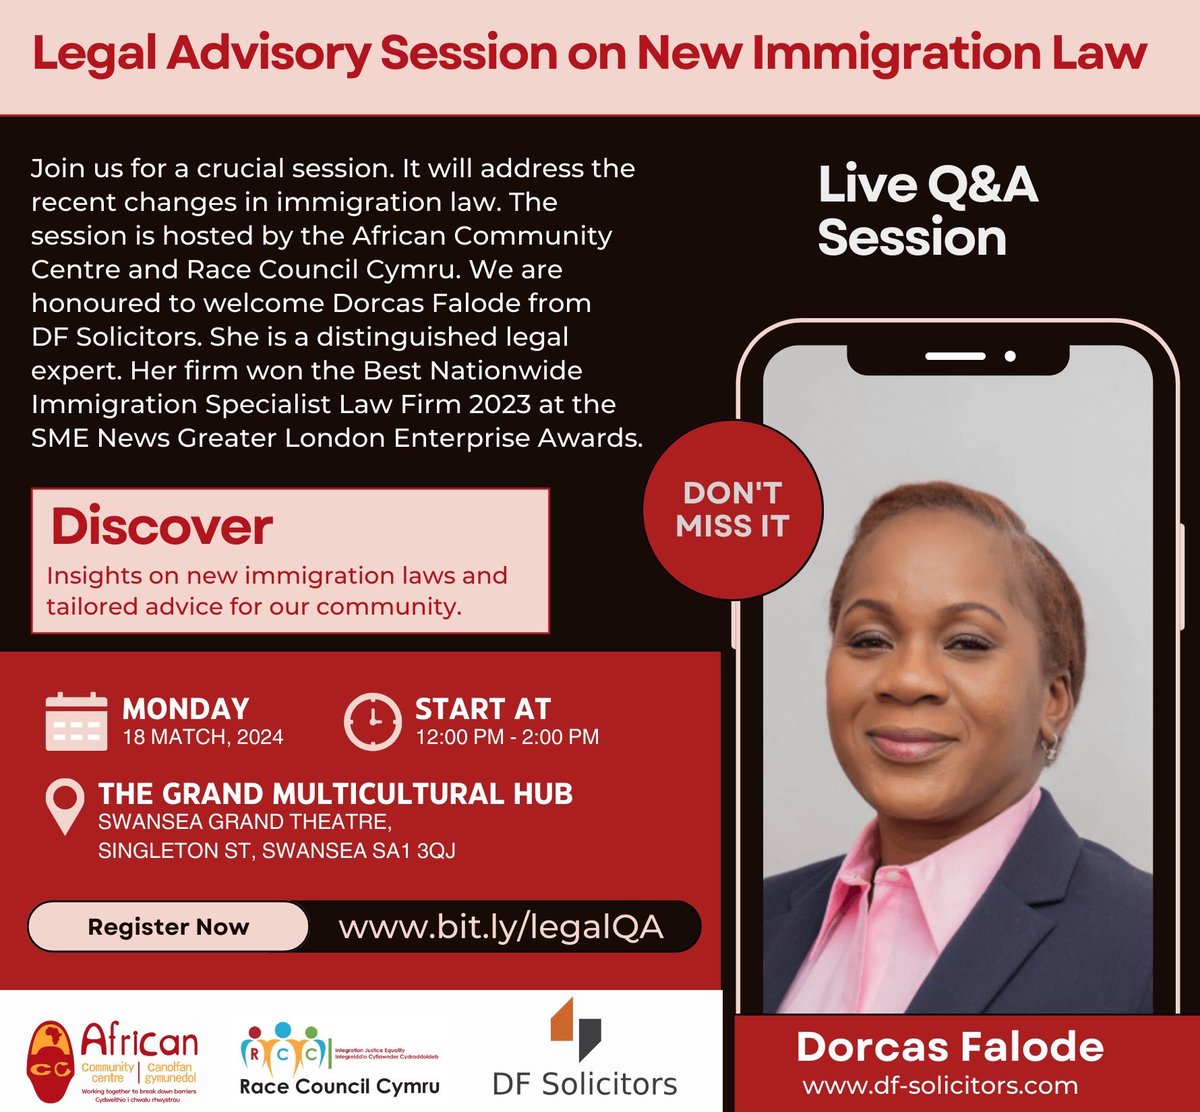 We were honored to host an informative Legal Advisory Session on Immigration Law,providing tailored advice and clarity on immigration law. Thanks to Dorcas folade,her insights and tailored advice have been invaluable #ImmigrationLaw #Accwales #AfricanCommunityCentre #DFSolicitors